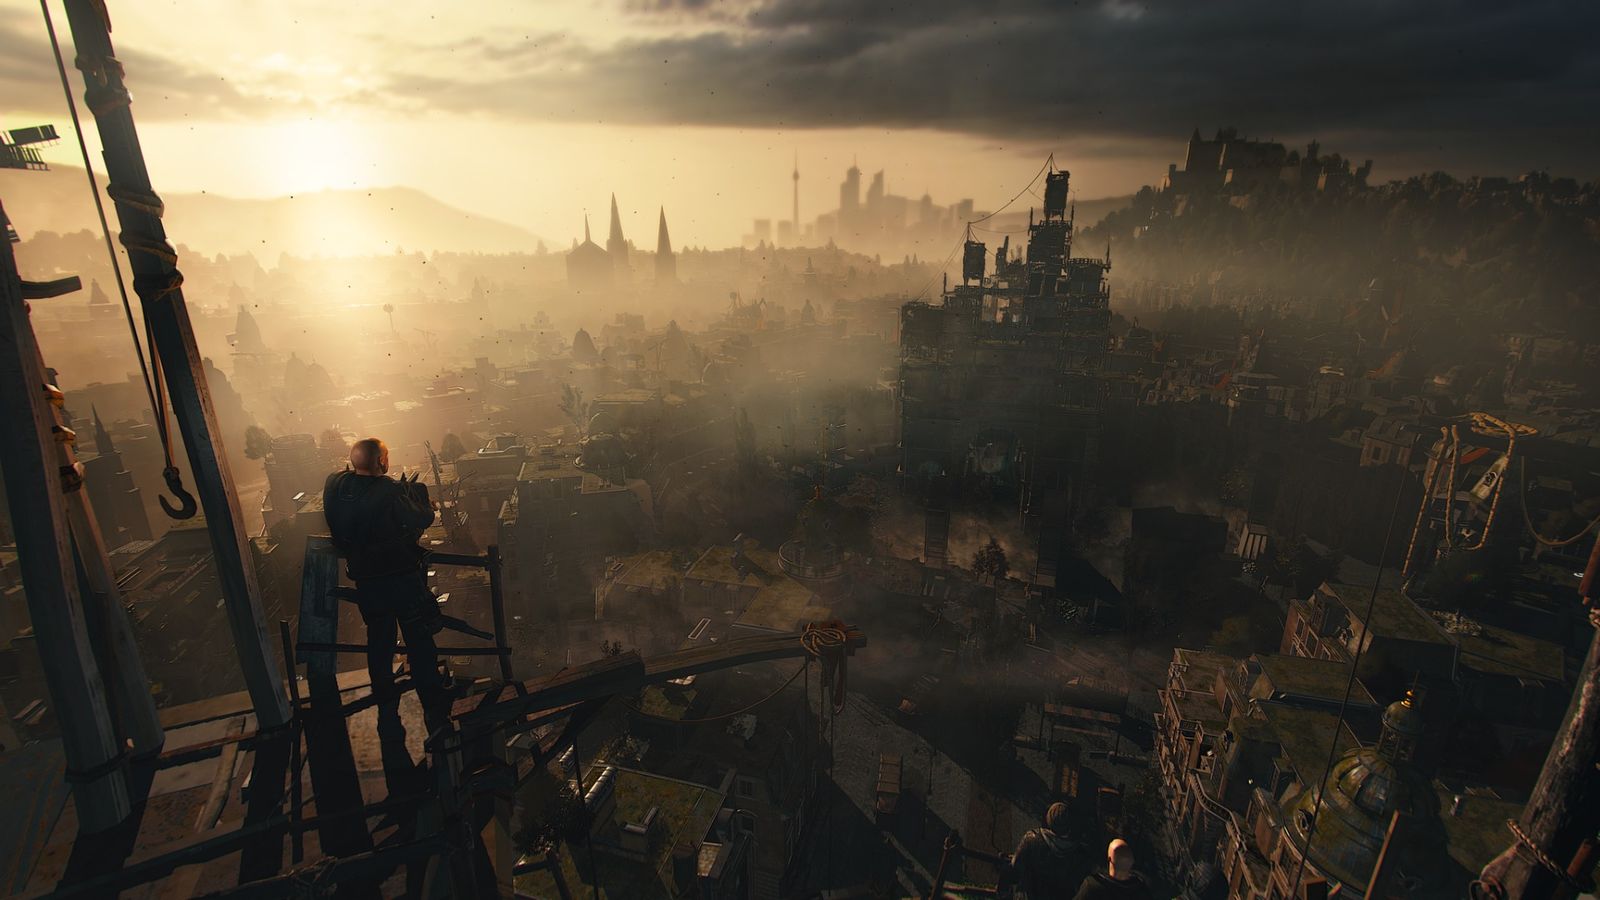 Dying Light 2 Citizens of Villedor looking out at The City from a Water Tower